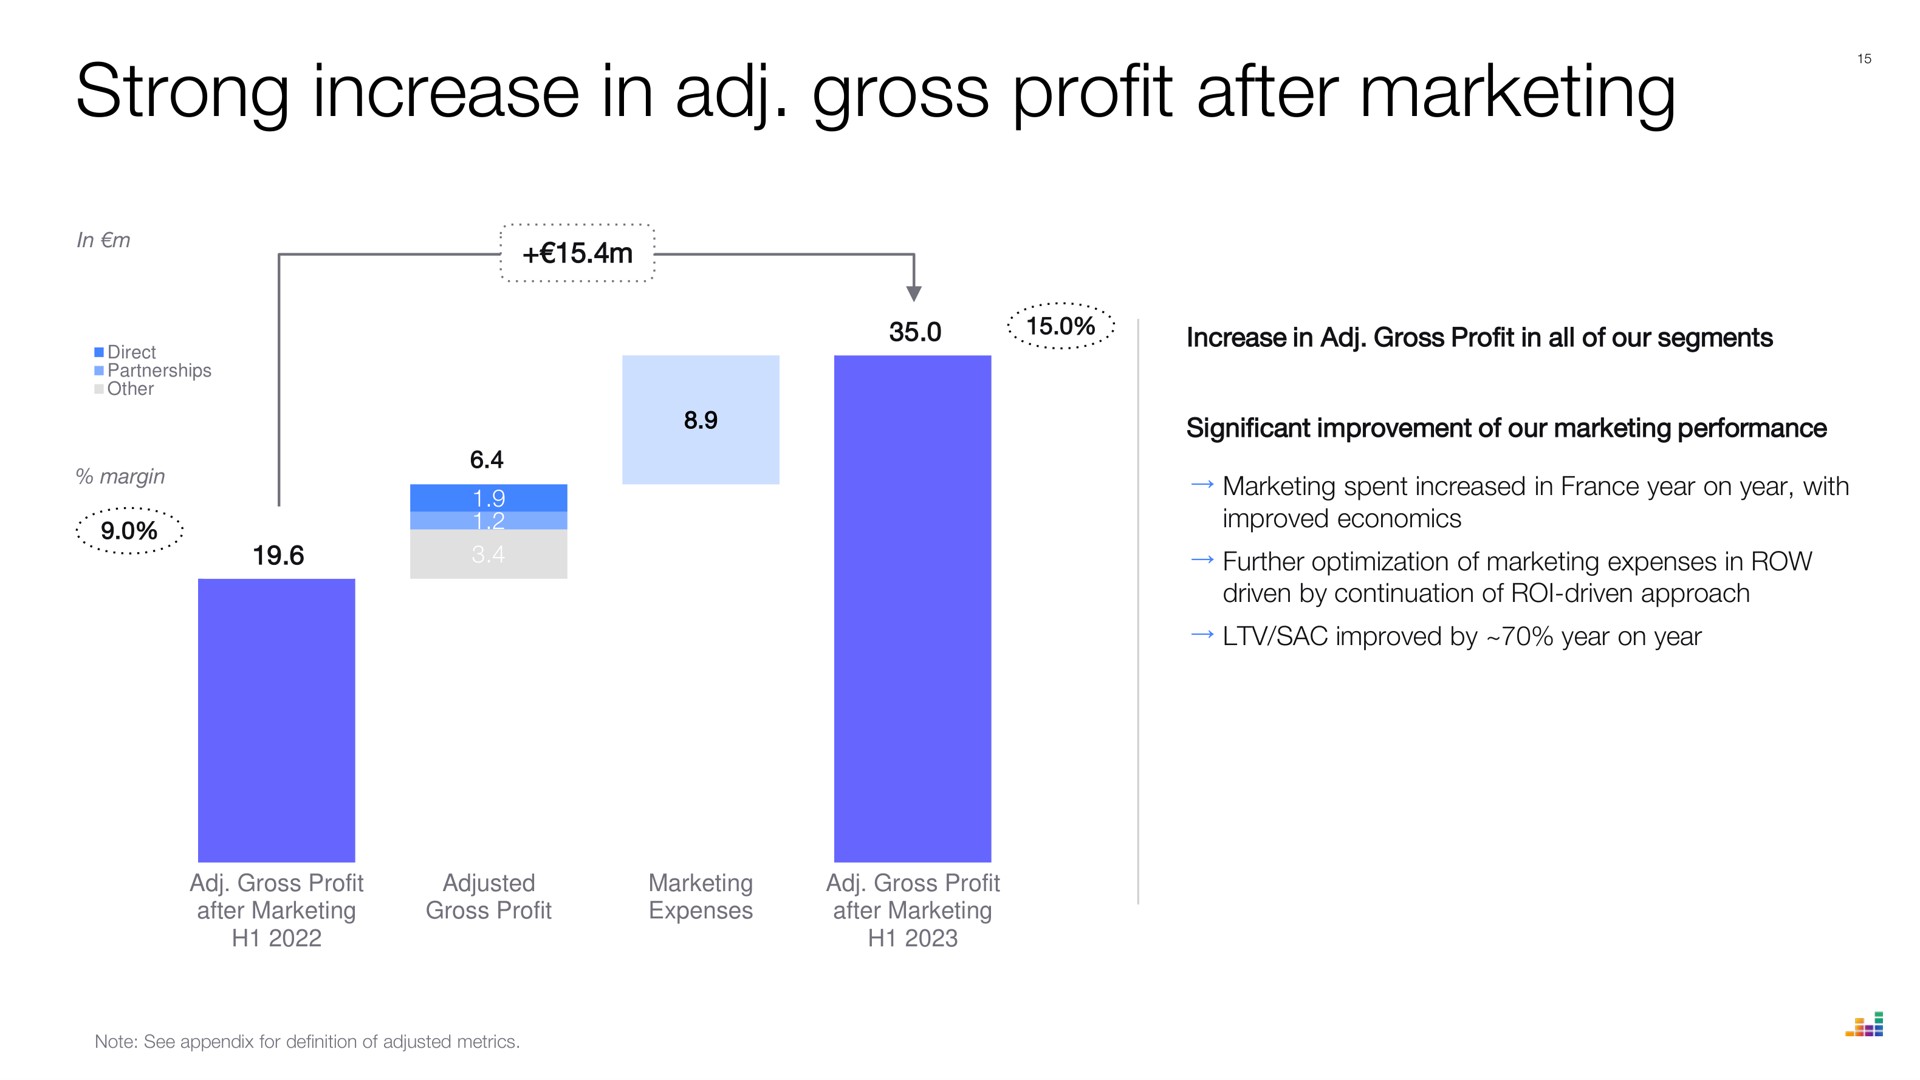 strong increase in gross profit after marketing | Deezer